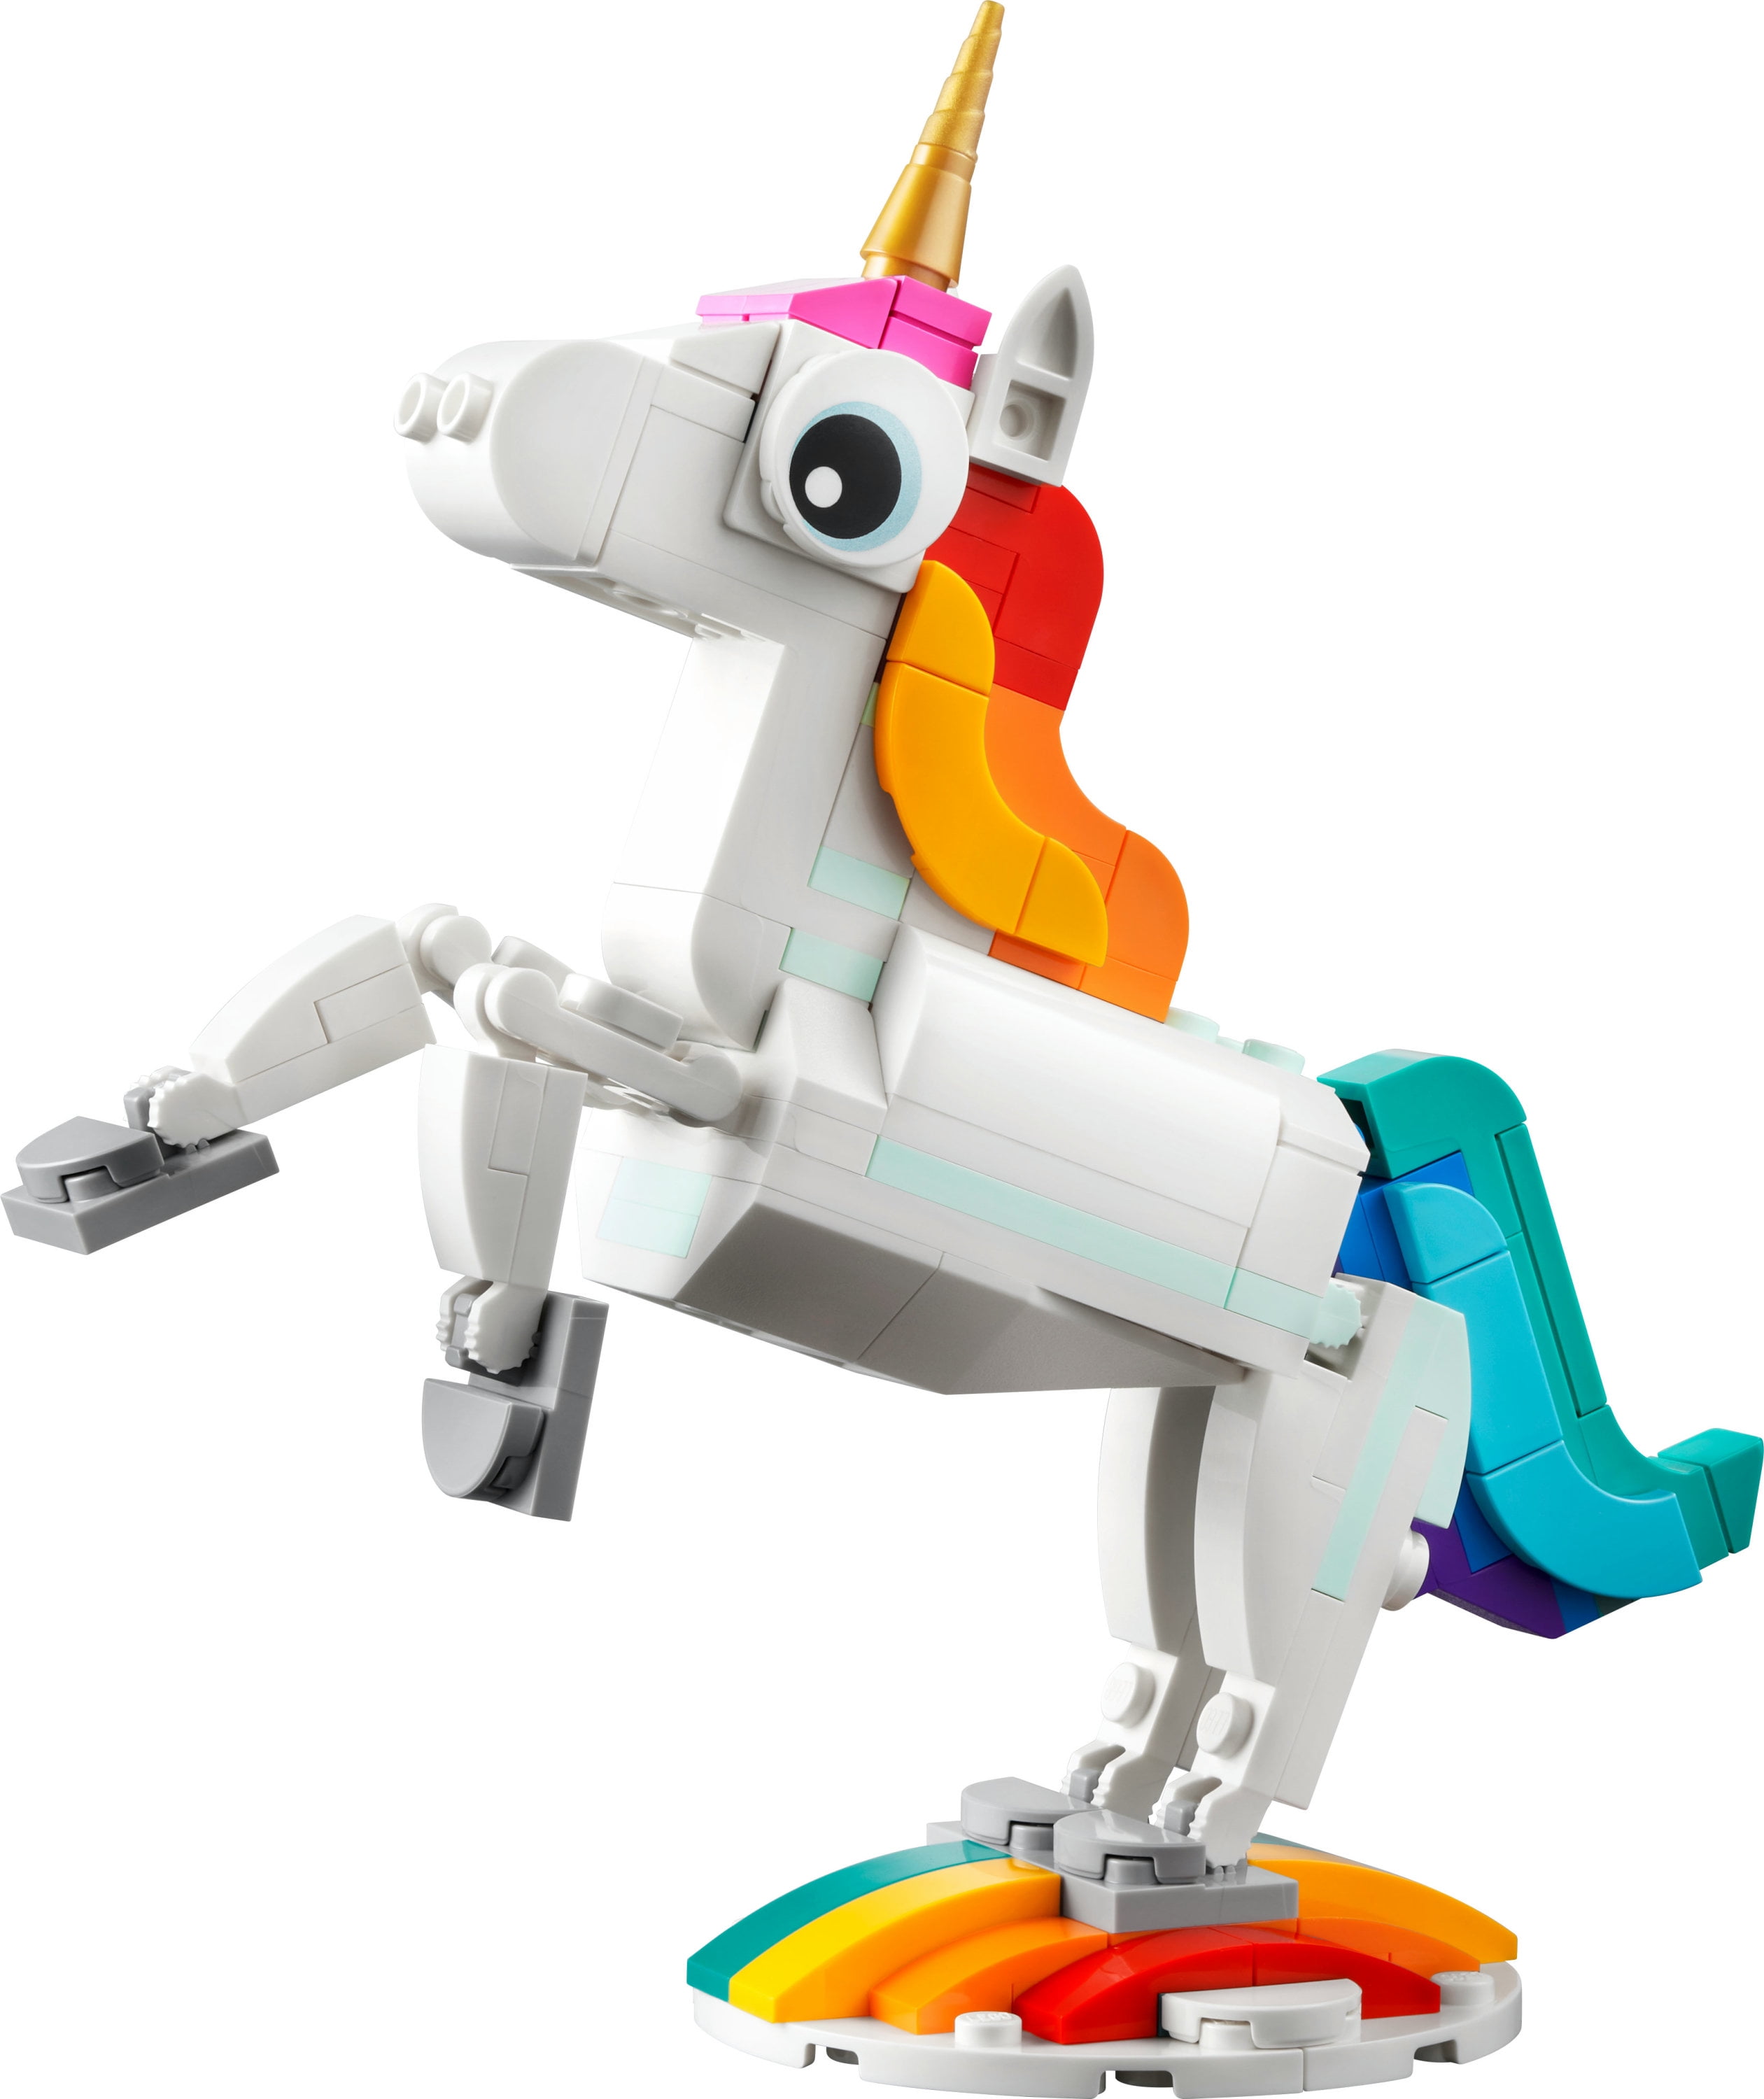 10 Rainbow Friends things you can make with 20 Lego pieces Part 3